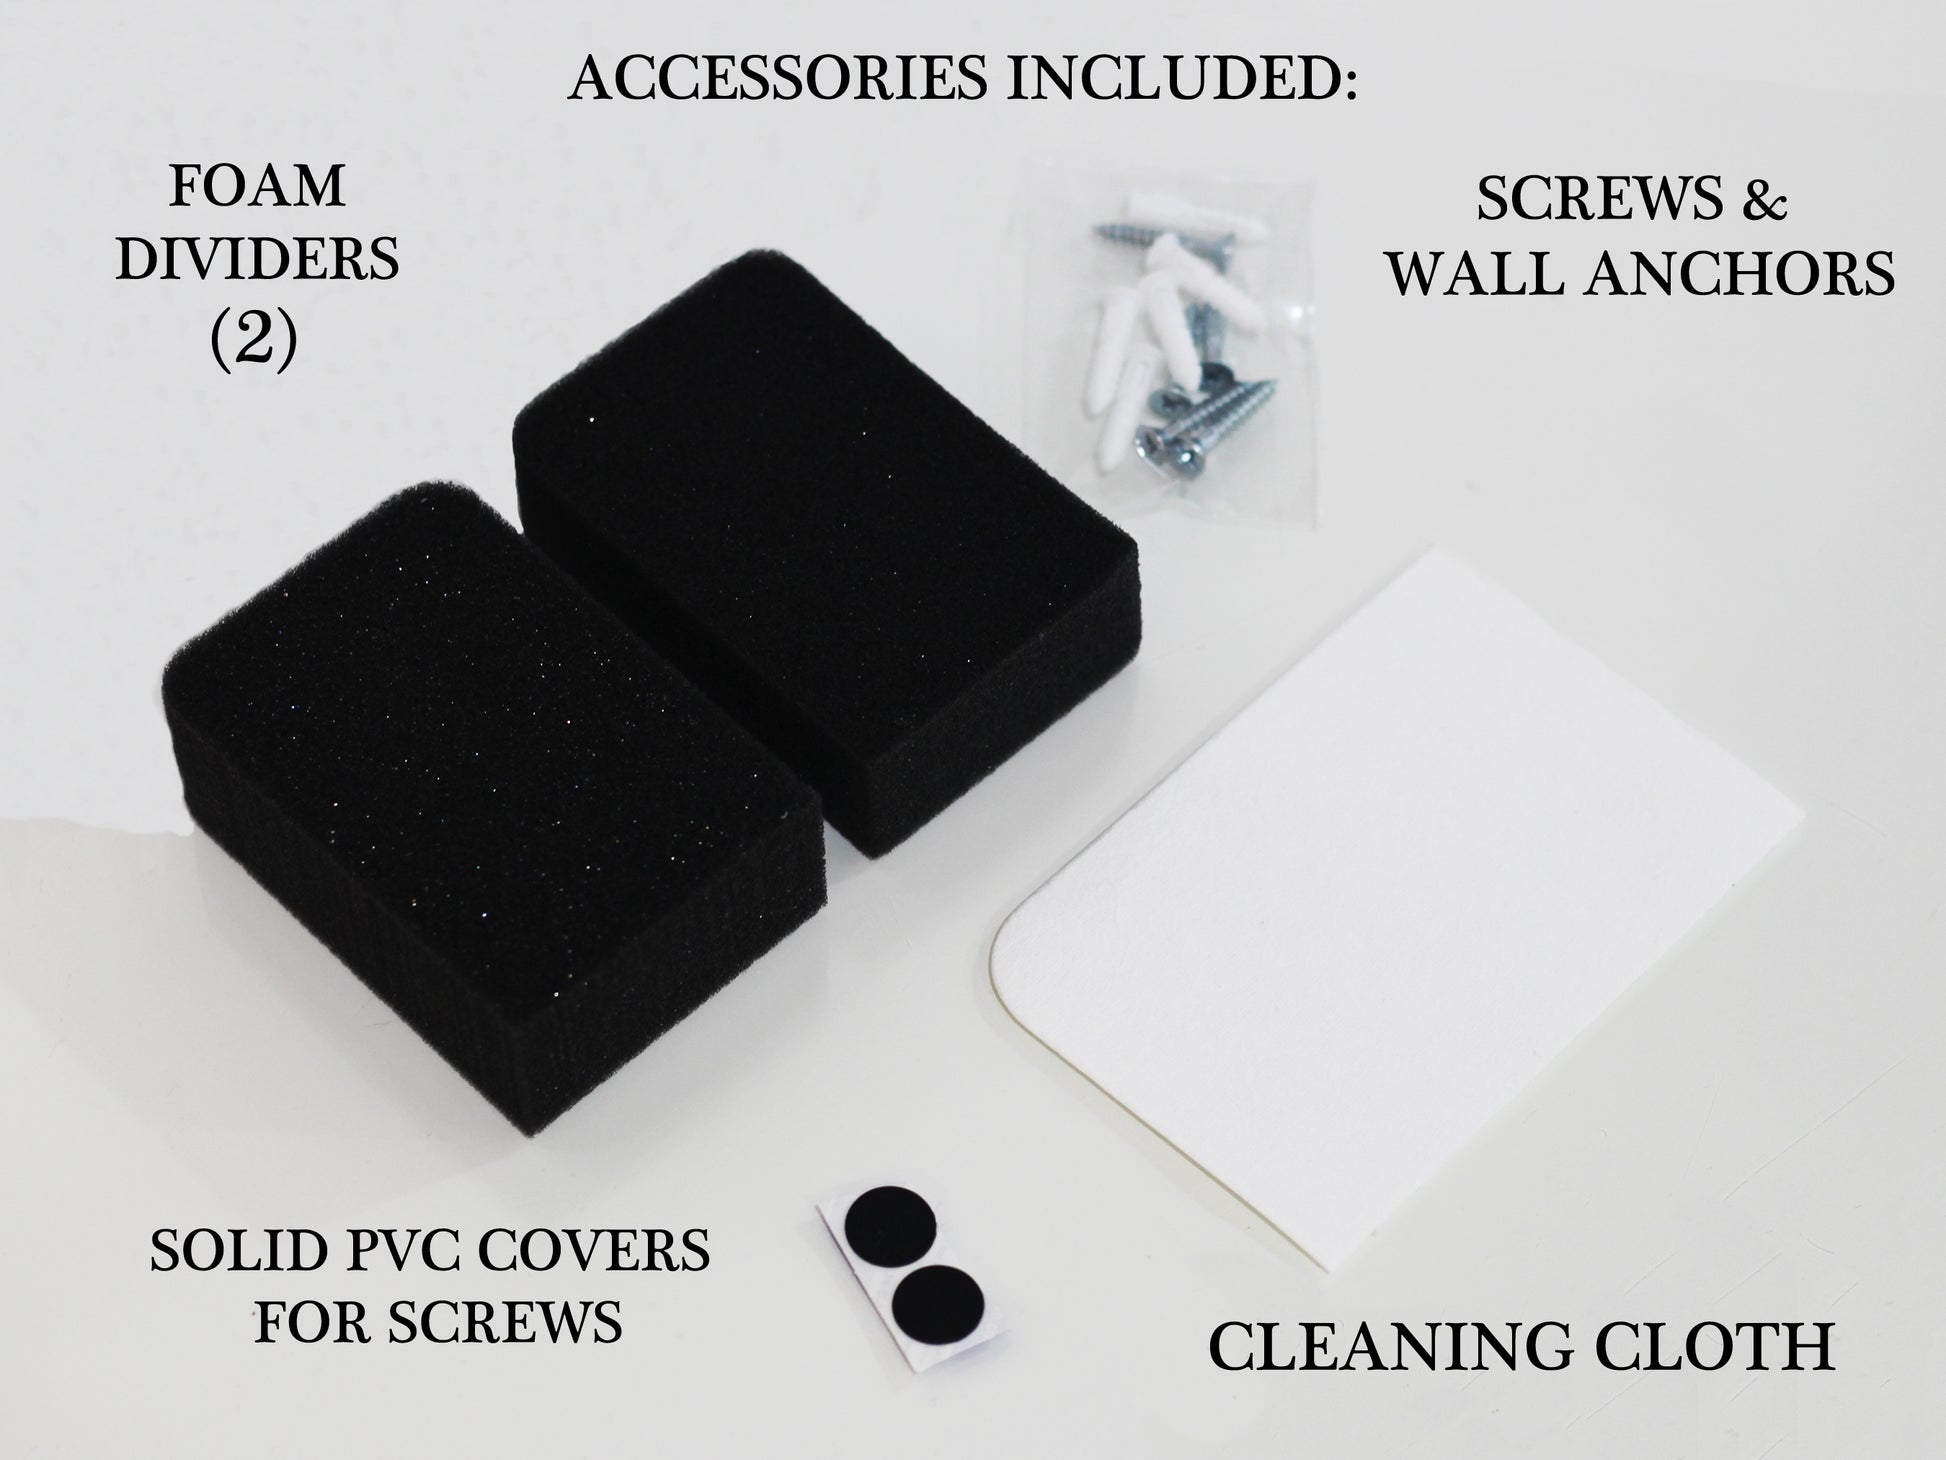 Mounting Hardware included with every Ultra Makeup Organizer Purchase. Accessories include necessary screws and wall anchors, two removable and optional foam dividers, solid pvc covers for screws, and a specialized cleaning cloth.